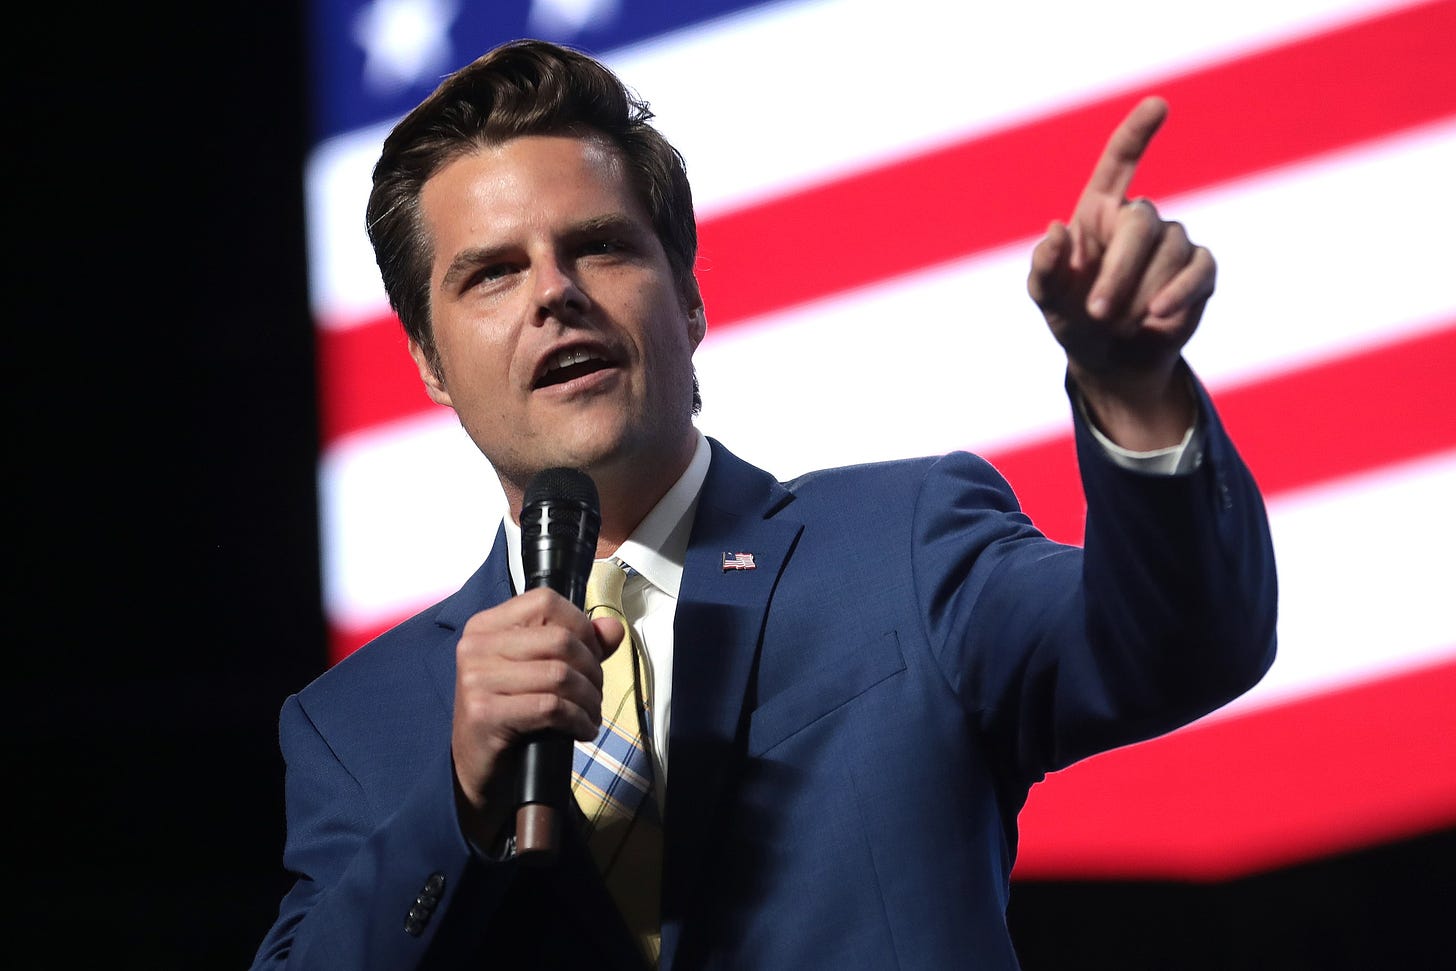 U.S. Congressman Matt Gaetz speaking with supporters at an "An Address to Young Americans" event, featuring President Donald Trump, hosted by Students for Trump and Turning Point Action at Dream City Church in Phoenix, Arizona. Photo by Gage Skidmore